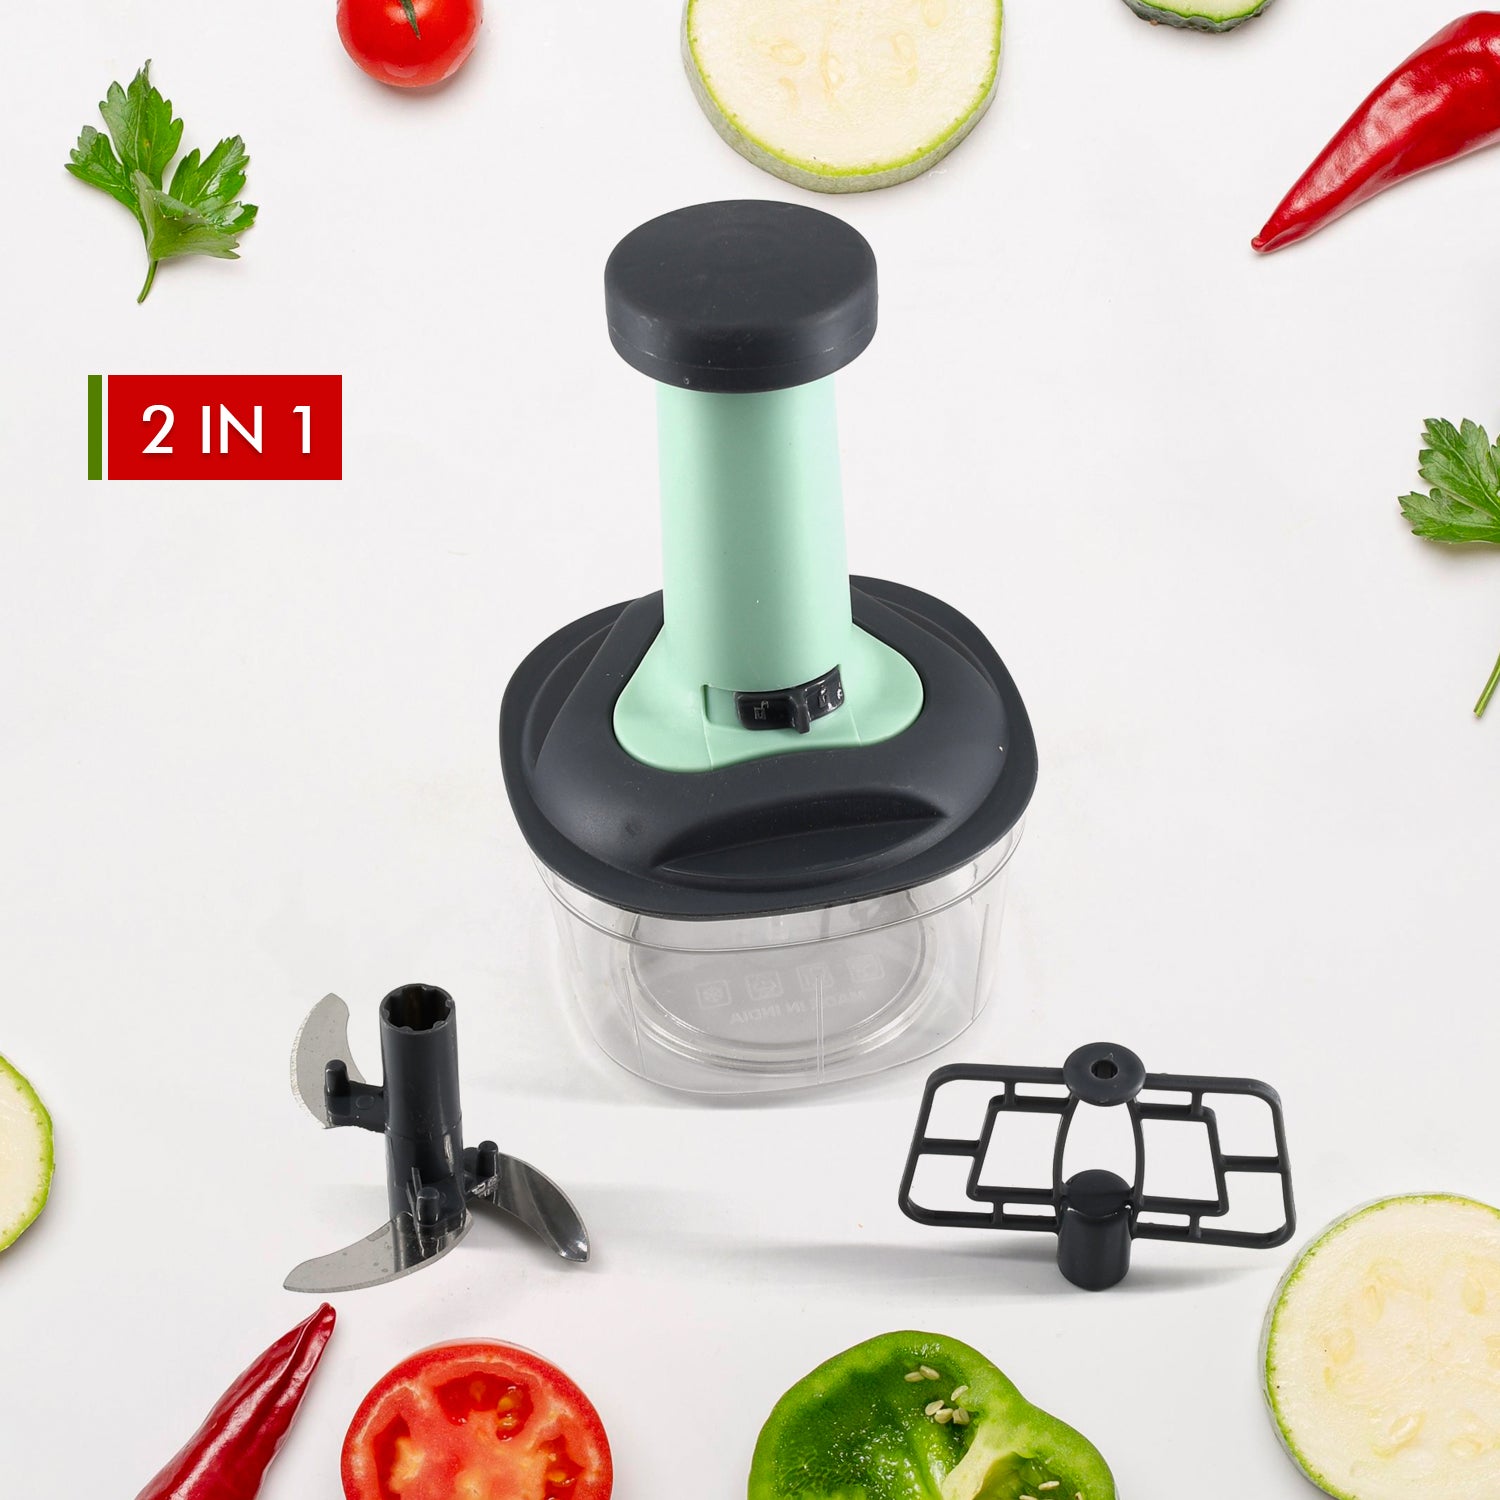 5902 PUSH CHOPPER MANUAL FOOD CHOPPER AND HAND PUSH VEGETABLE CHOPPER, CUTTER, MIXER SET FOR KITCHEN WITH 3 STAINLESS STEEL BLADE. JK Trends